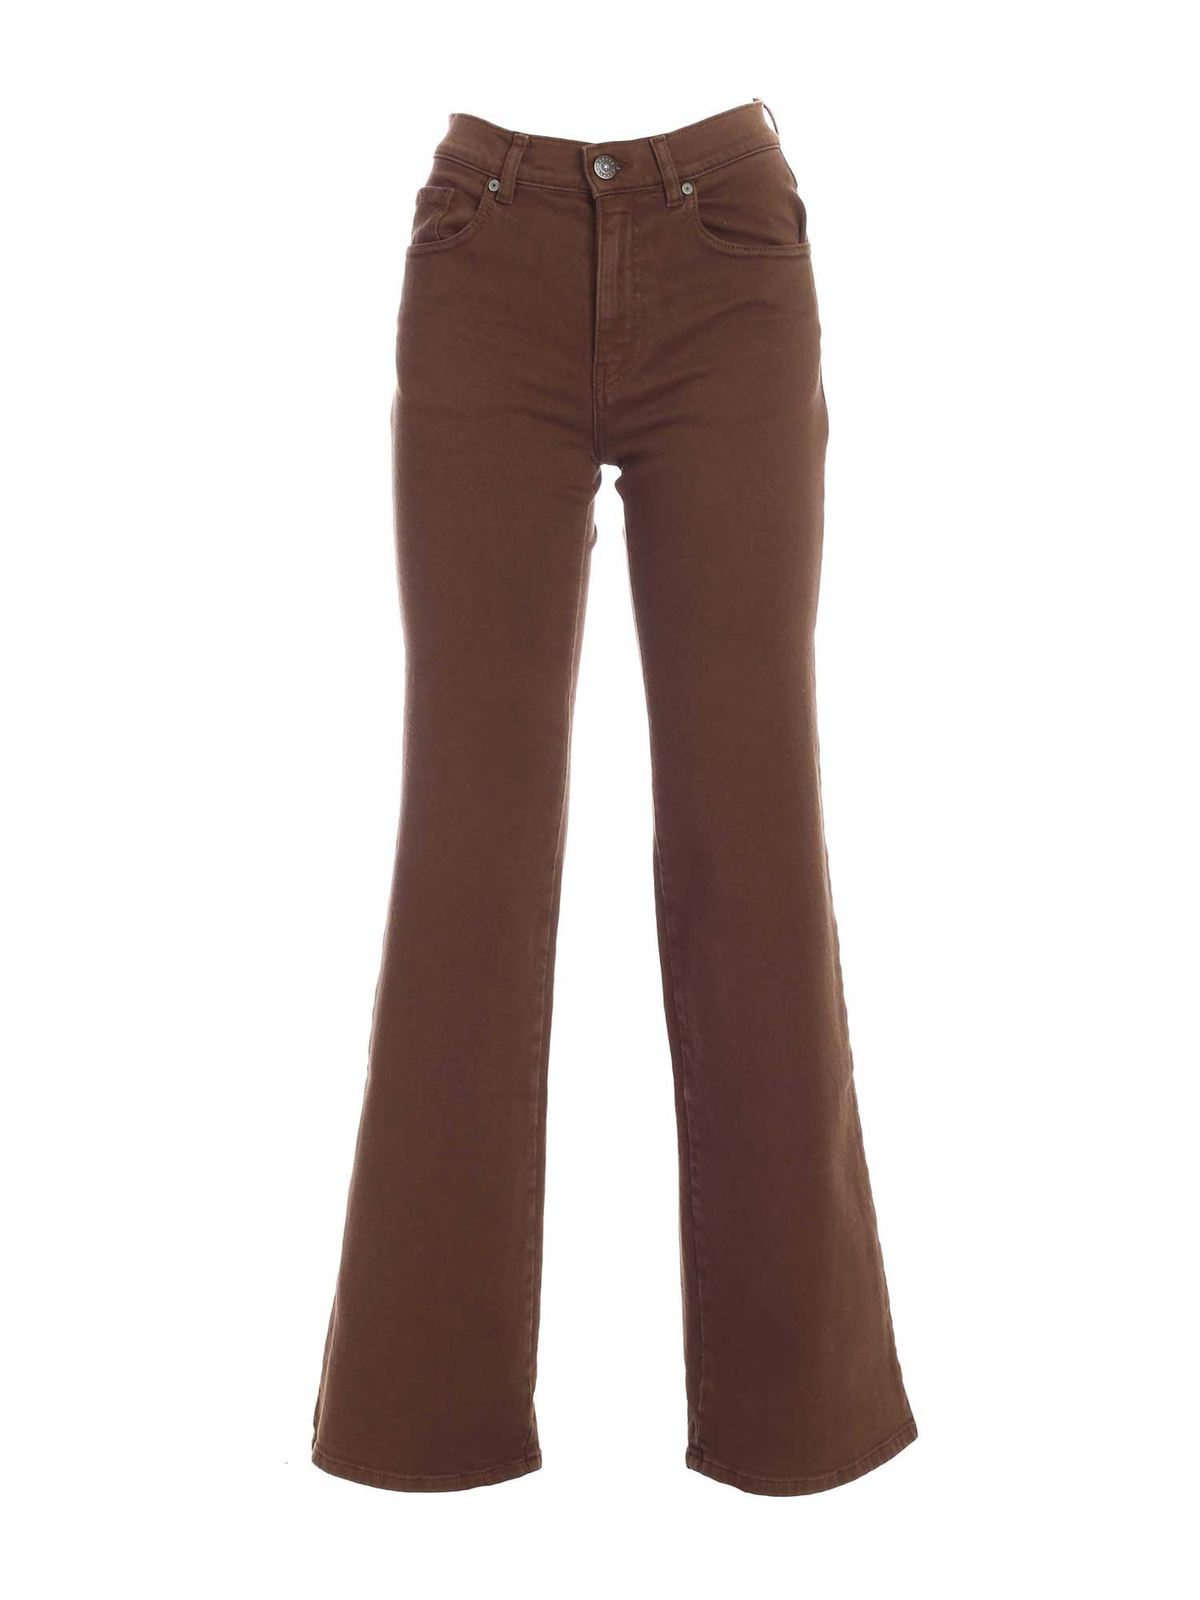 Flared jeans P.A.R.O.S.H. - Flared jeans in brown - CABAREXYD231182029